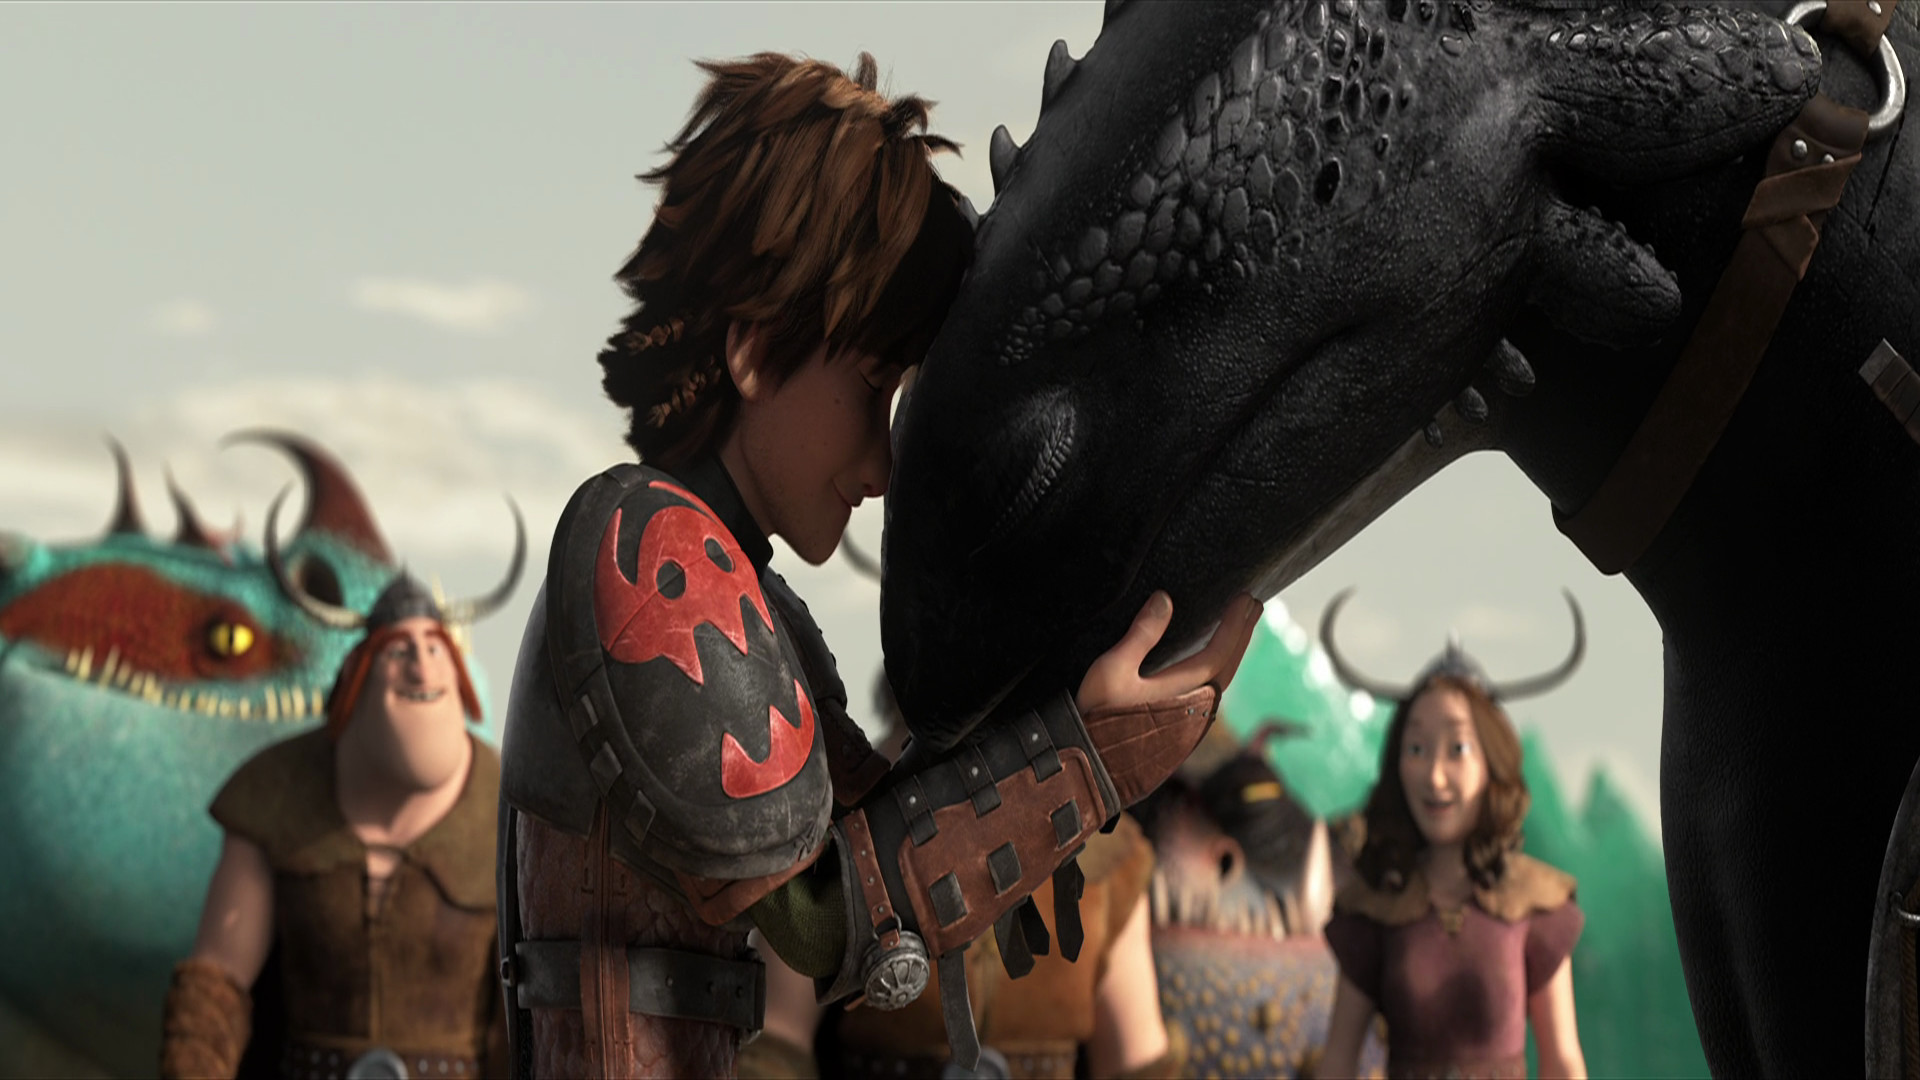 How to train your dragon 2 full movie in hindi free download utorrent star conflict download utorrent free